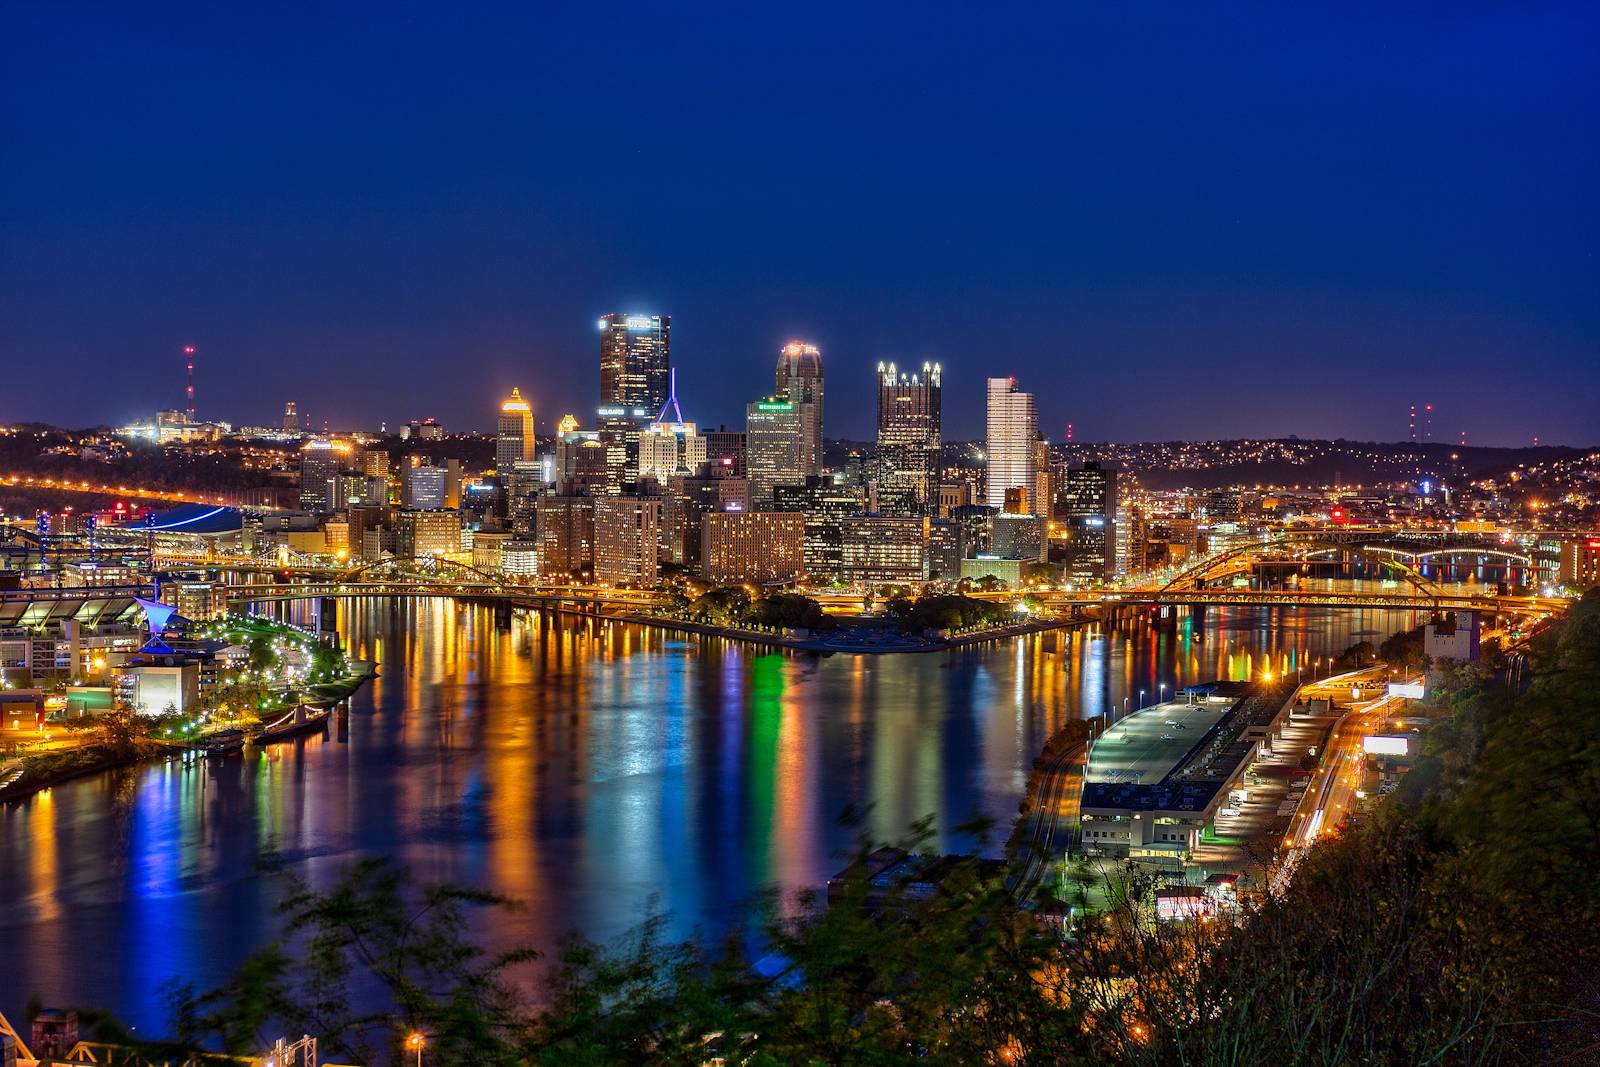 Pittsburgh Cool Wallpaper 16270 Image. largepict